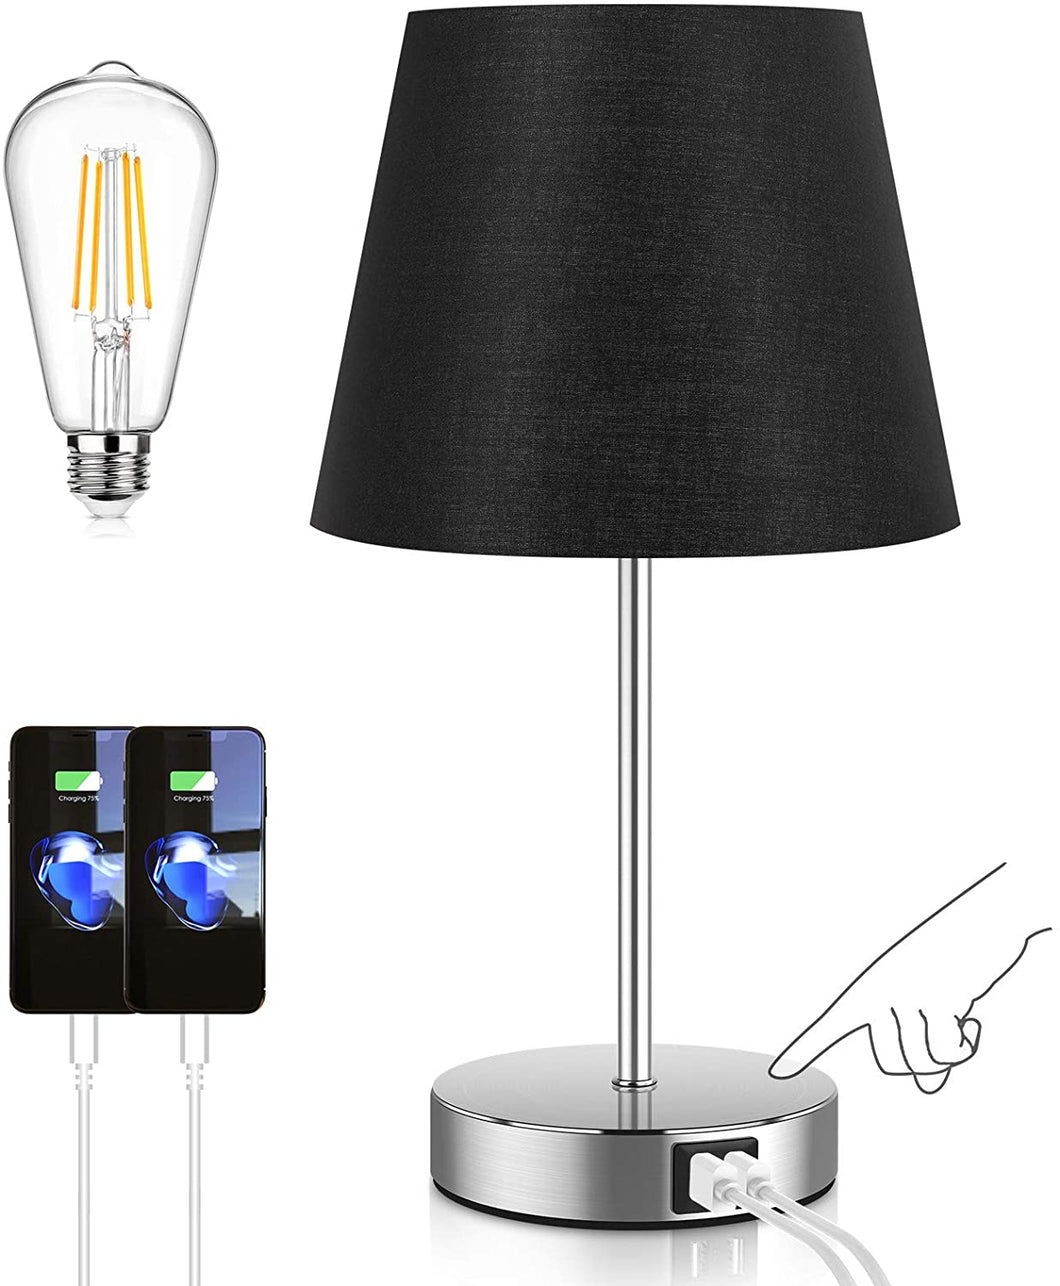 Touch Control Table Lamp with 2 USB Ports and AC Outlet, 3 Way Dimmable Modern Bedside Nightstand Lamp with Black Fabric Shade & Satin Nickle Base for Bedroom Living Room Office, LED Bulb Included